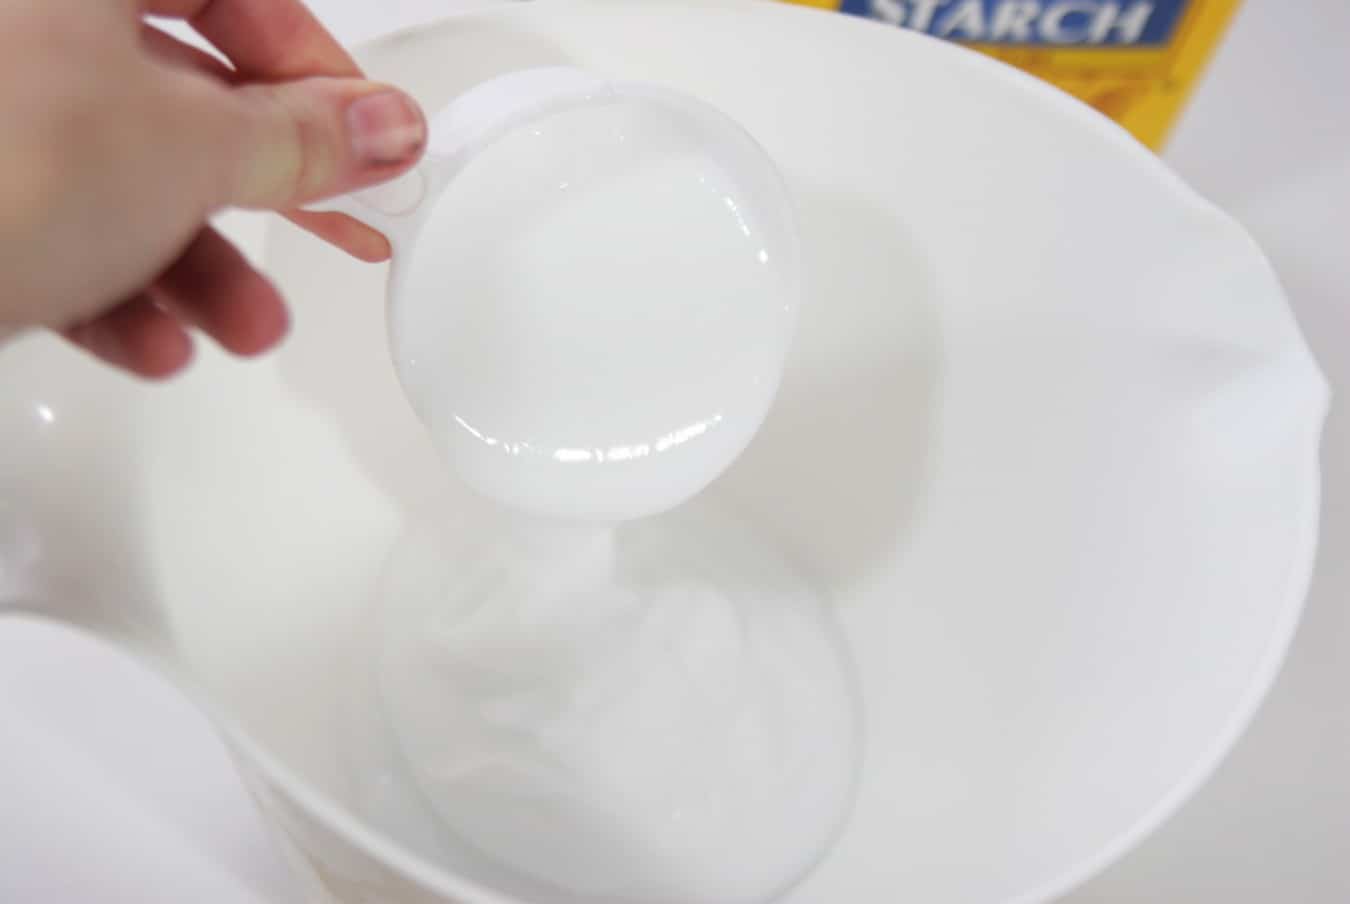 Mix the conditioner and corn starch together in a bowl